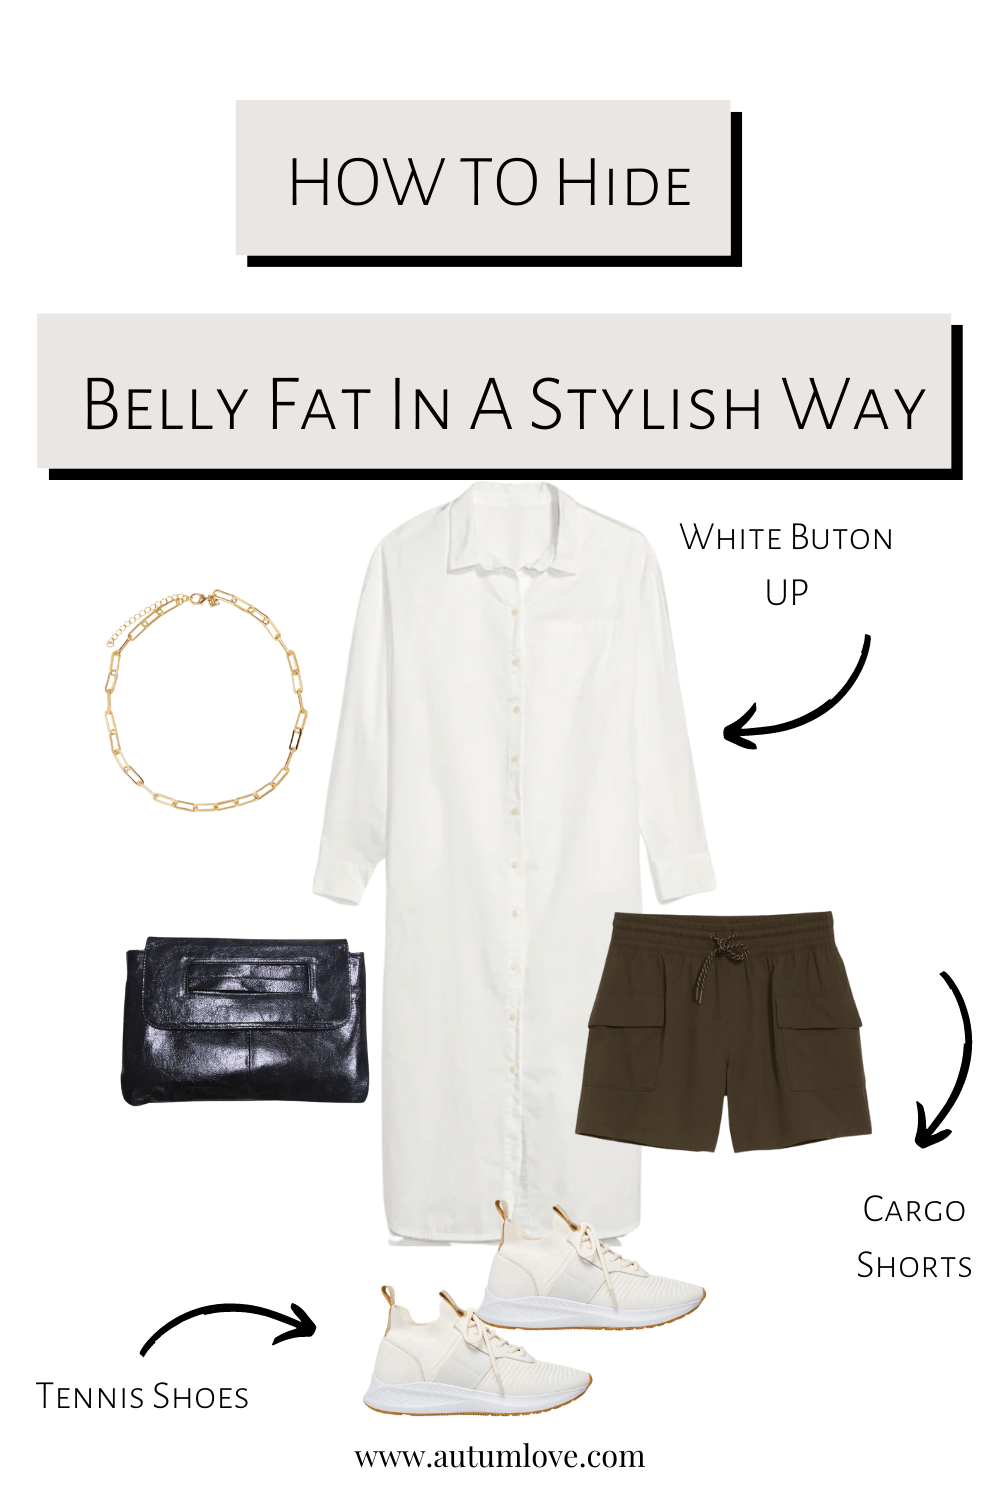 How to dress to hide belly fat — No Time For Style